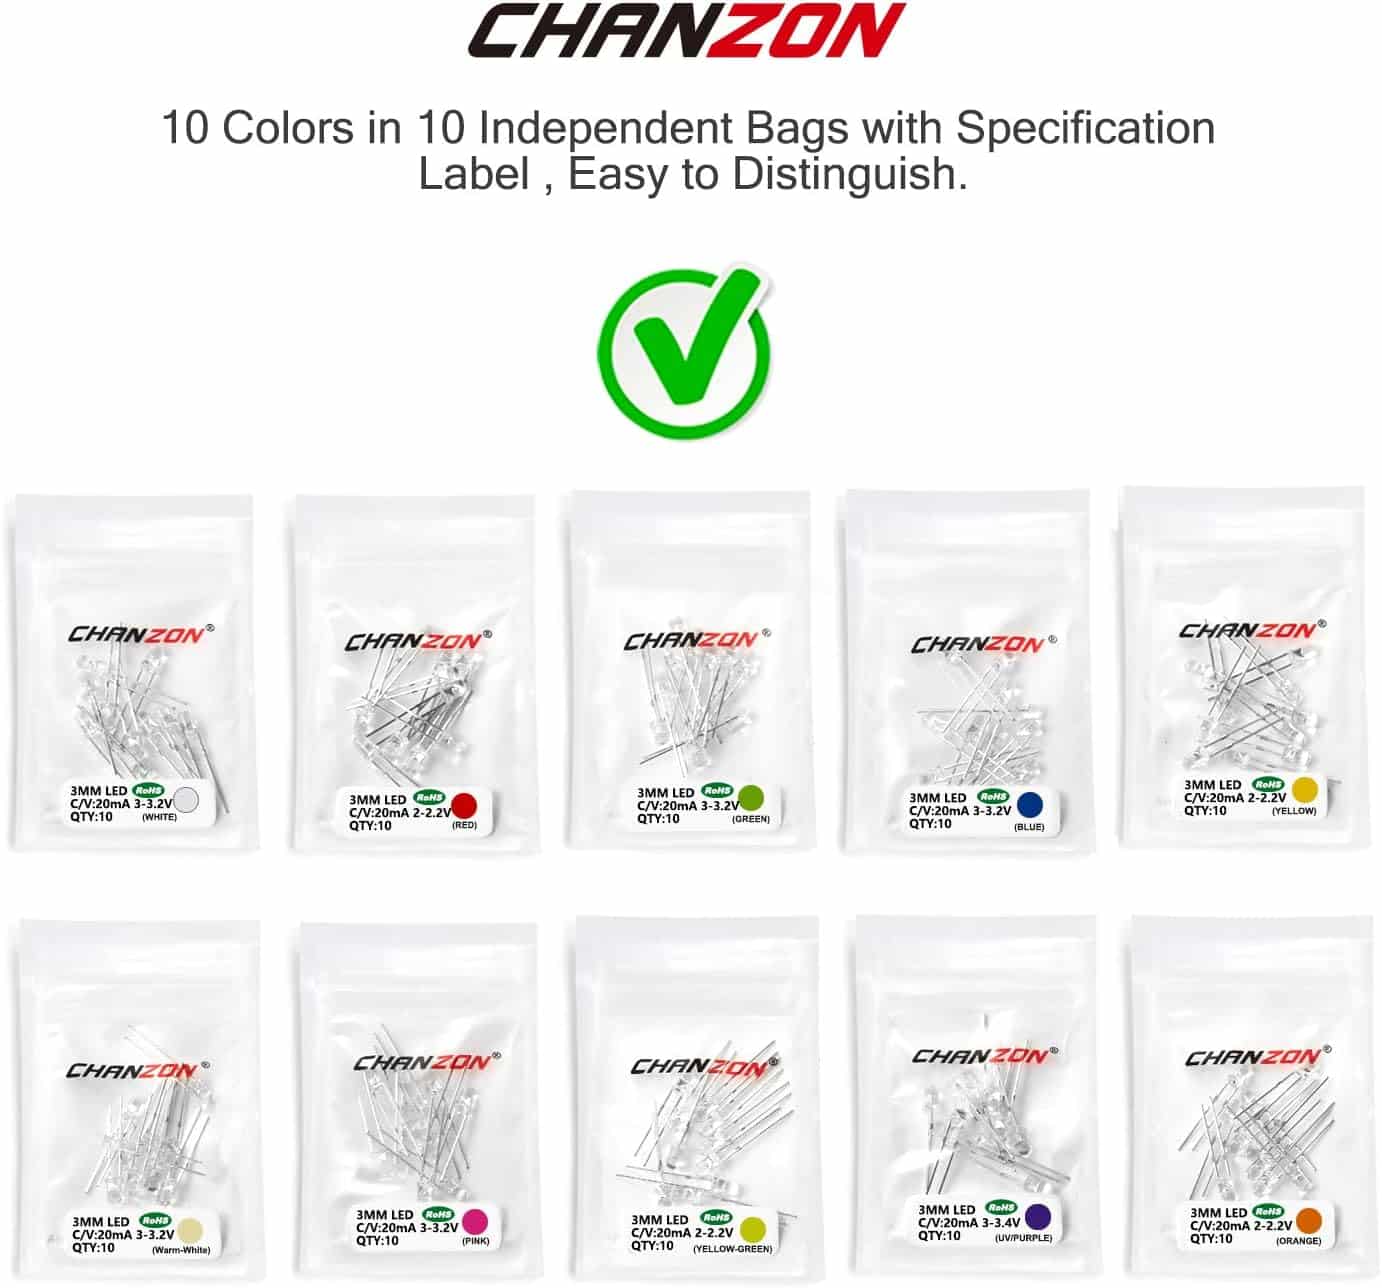 CHANZON 100pcs (10 Colors x 10pcs) 3mm LED Diode Lights Assortment (Clear Transparent Lens) Emitting Lighting Bulb Lamp Assorted Kit Variety Colour Warm White Red Yellow Green Blue Orange UV Pink